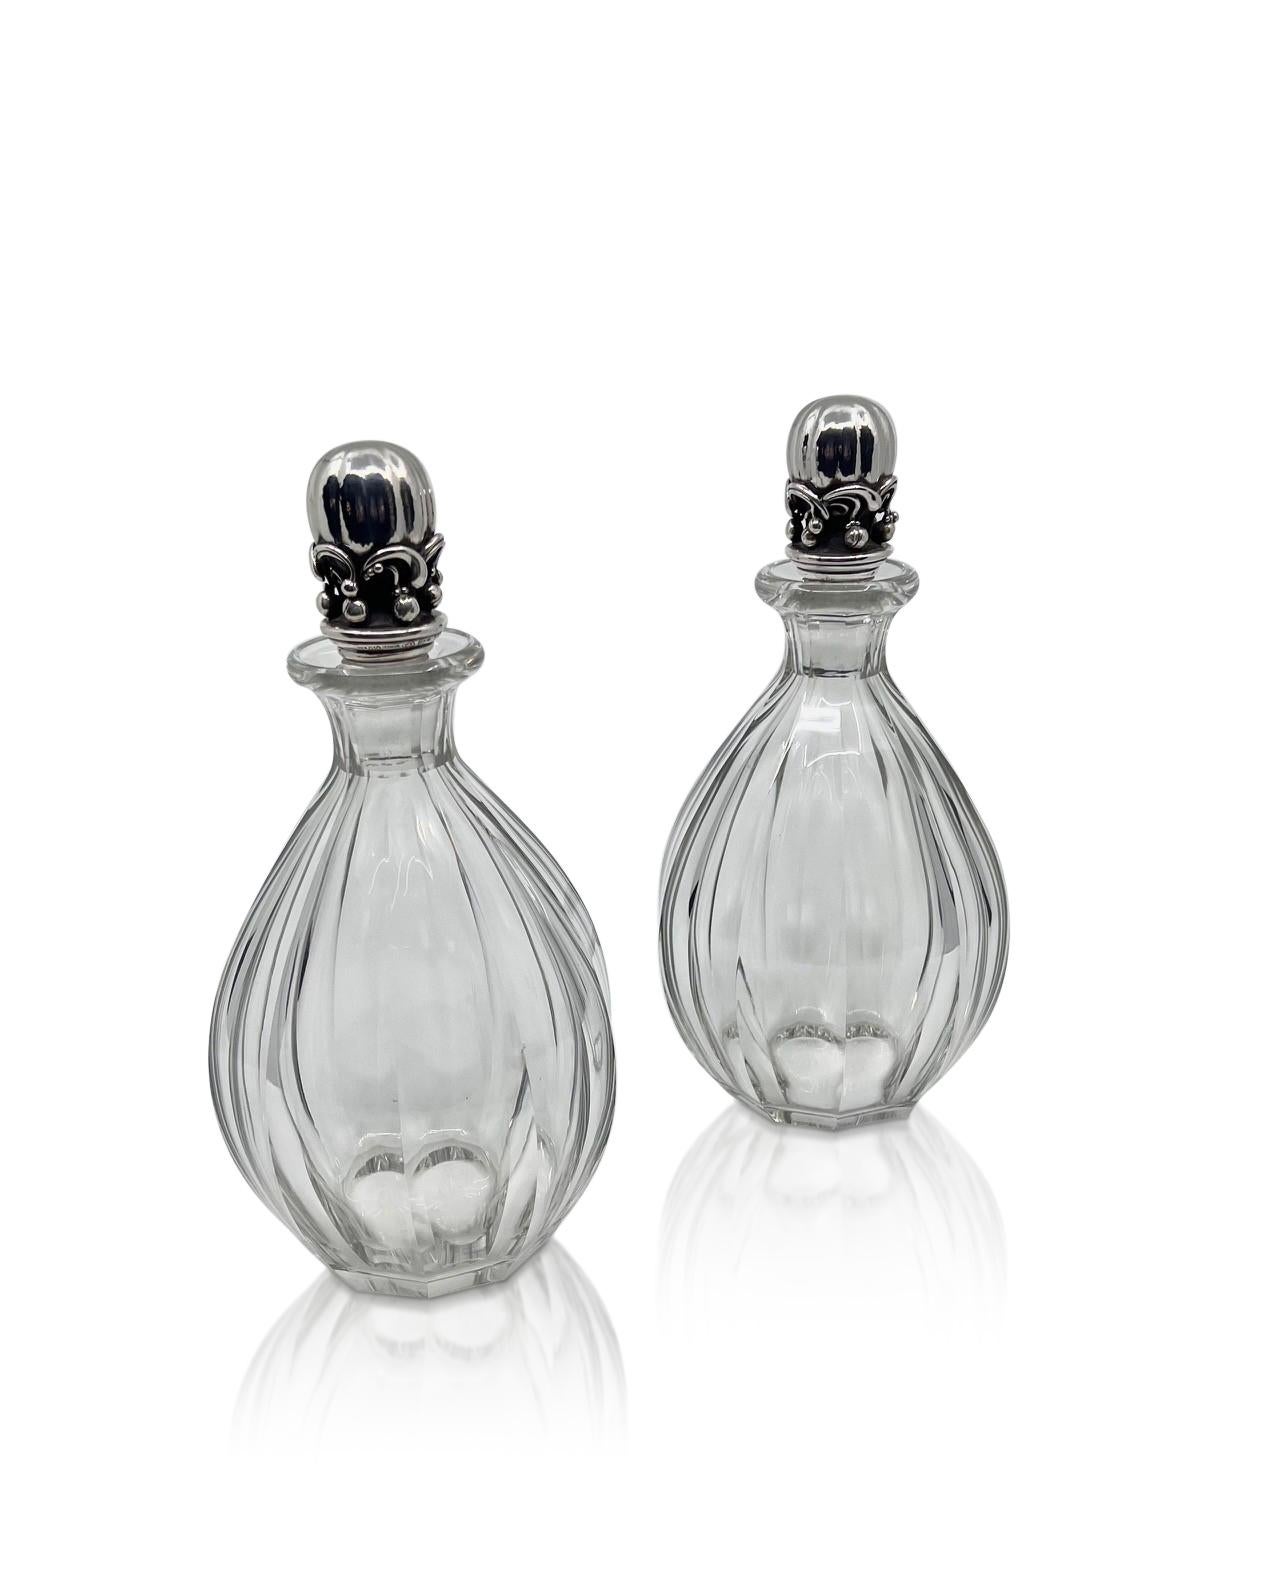 Georg Jensen Pair of Sterling Silver and Crystal Decanters #100 In Good Condition For Sale In Hellerup, DK